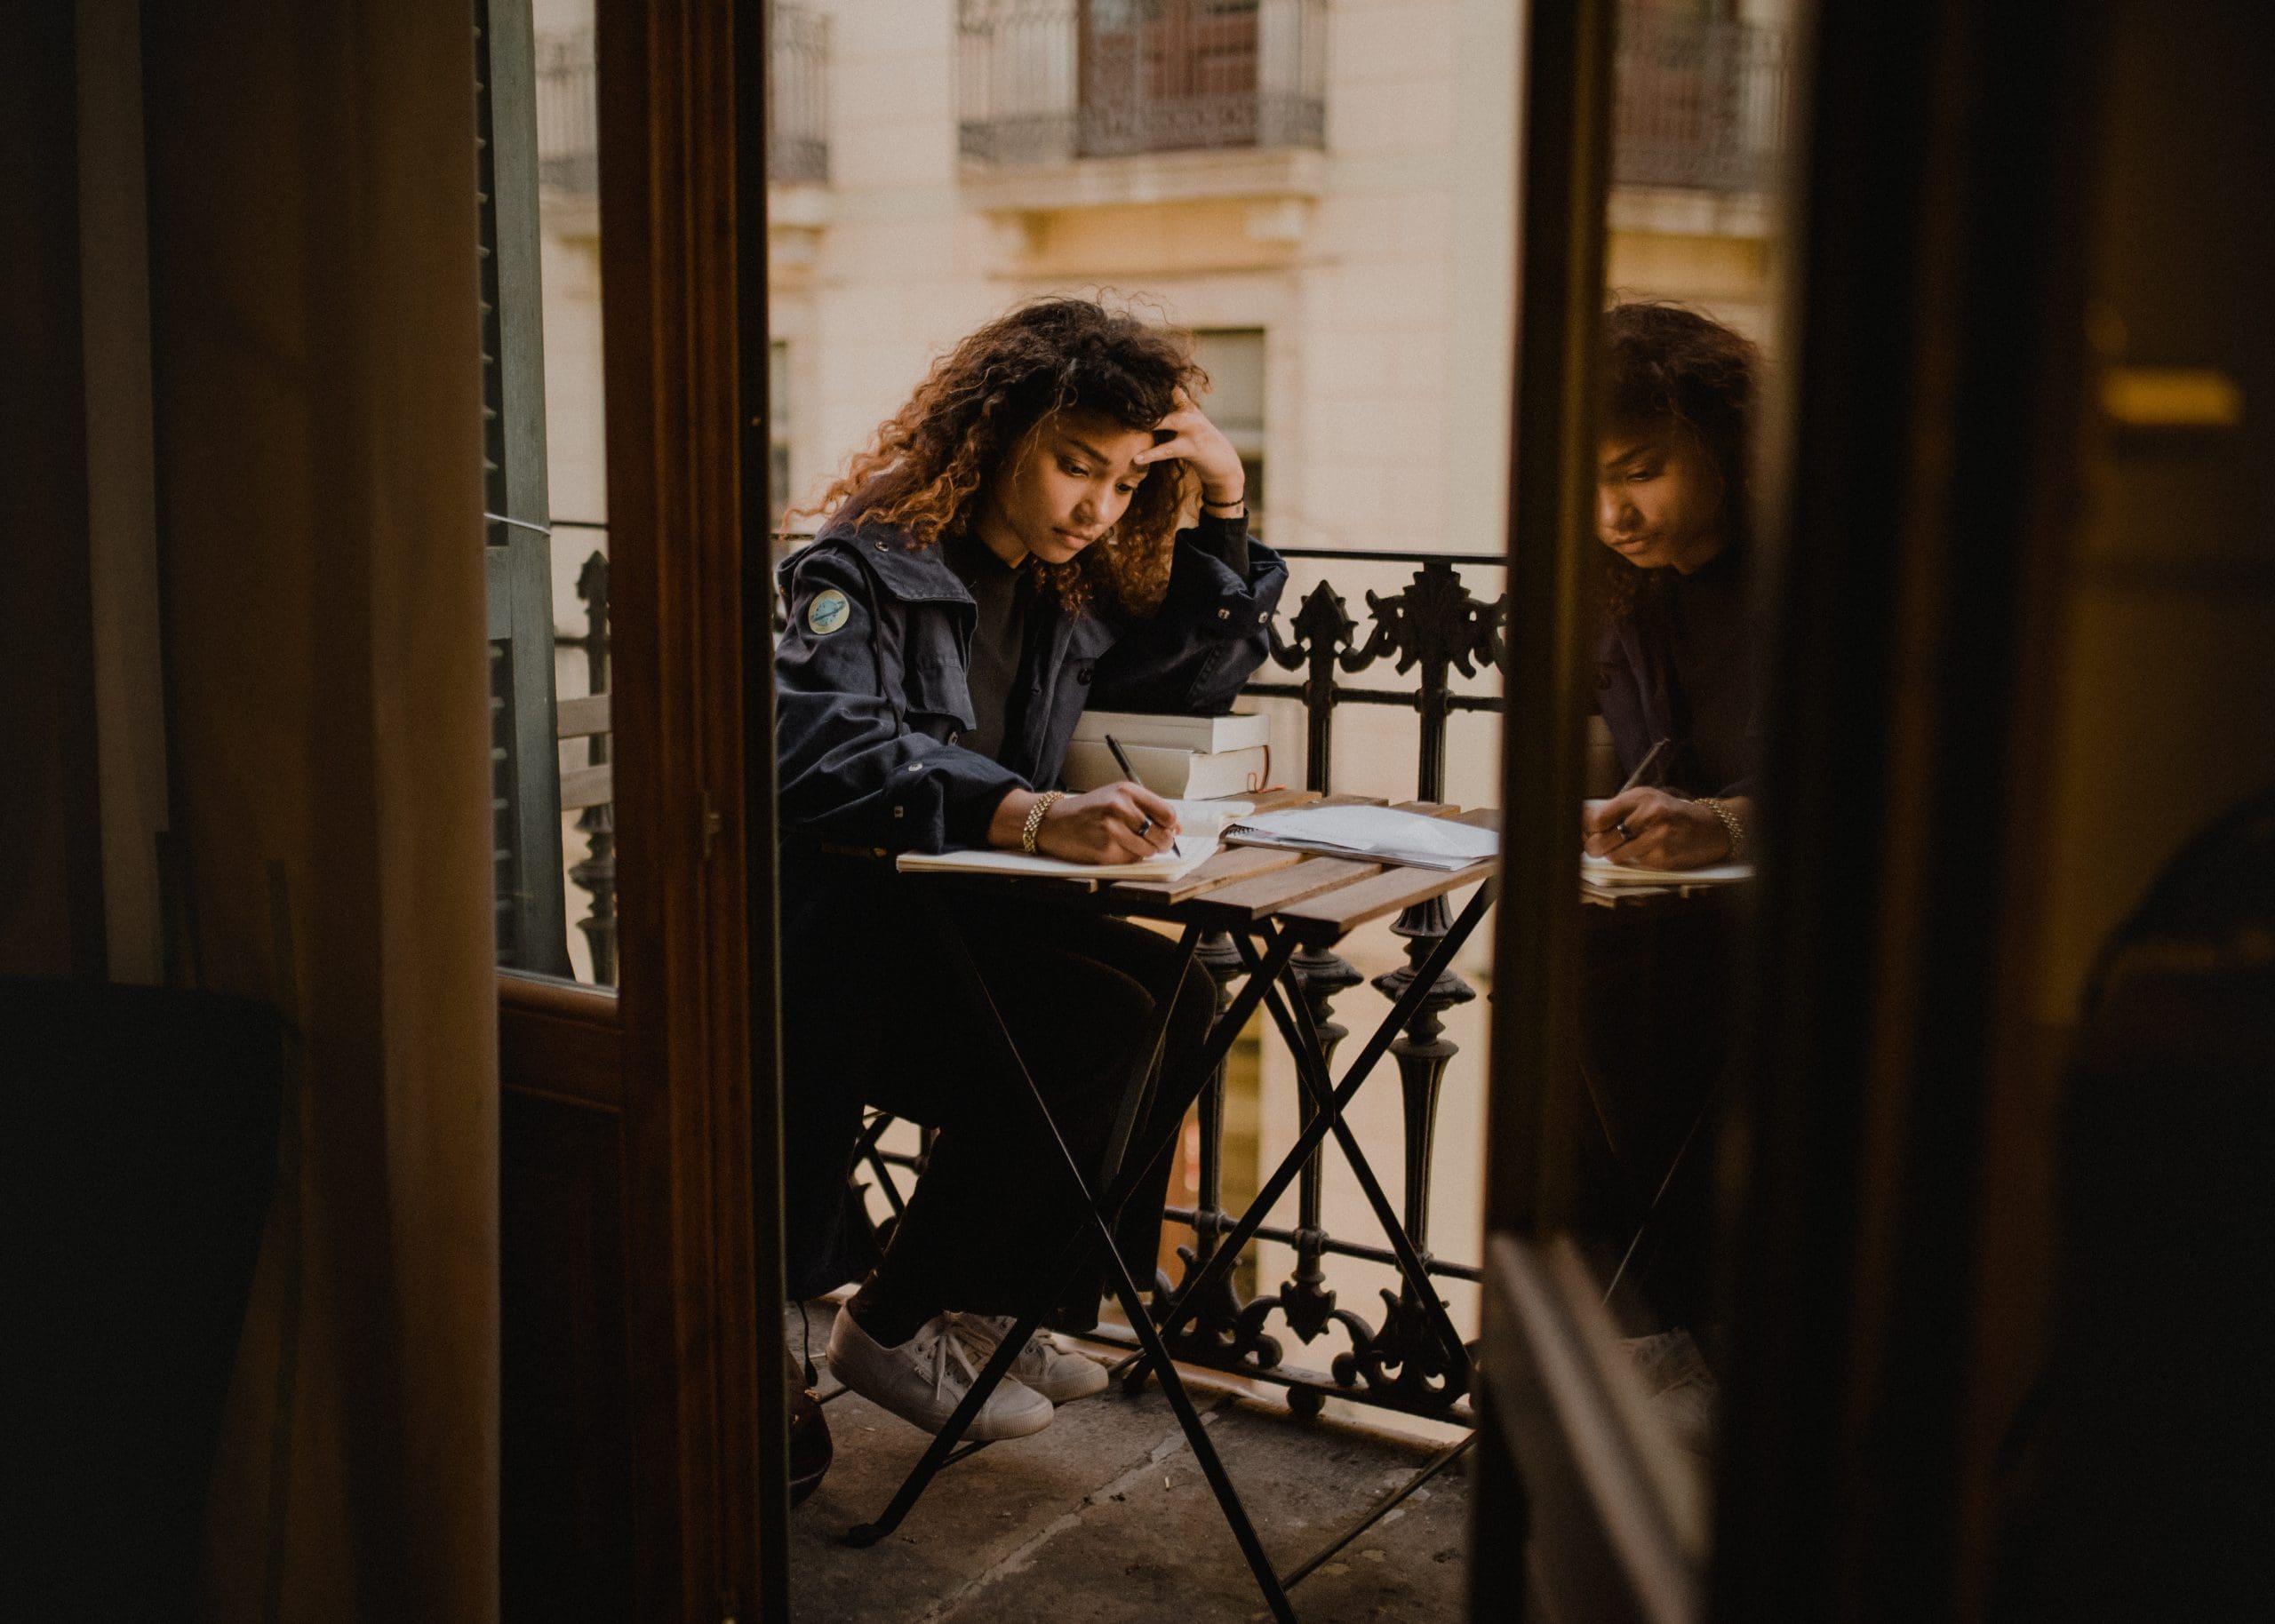 Unlike most things that you likely put on your resume, studying abroad probably isn’t something you intentionally realize will make you desirable to employers. The truth is, your employer may not realize it either. It’s up to you to reflect on your past experiences and connect them to the tangible skills you have gained.